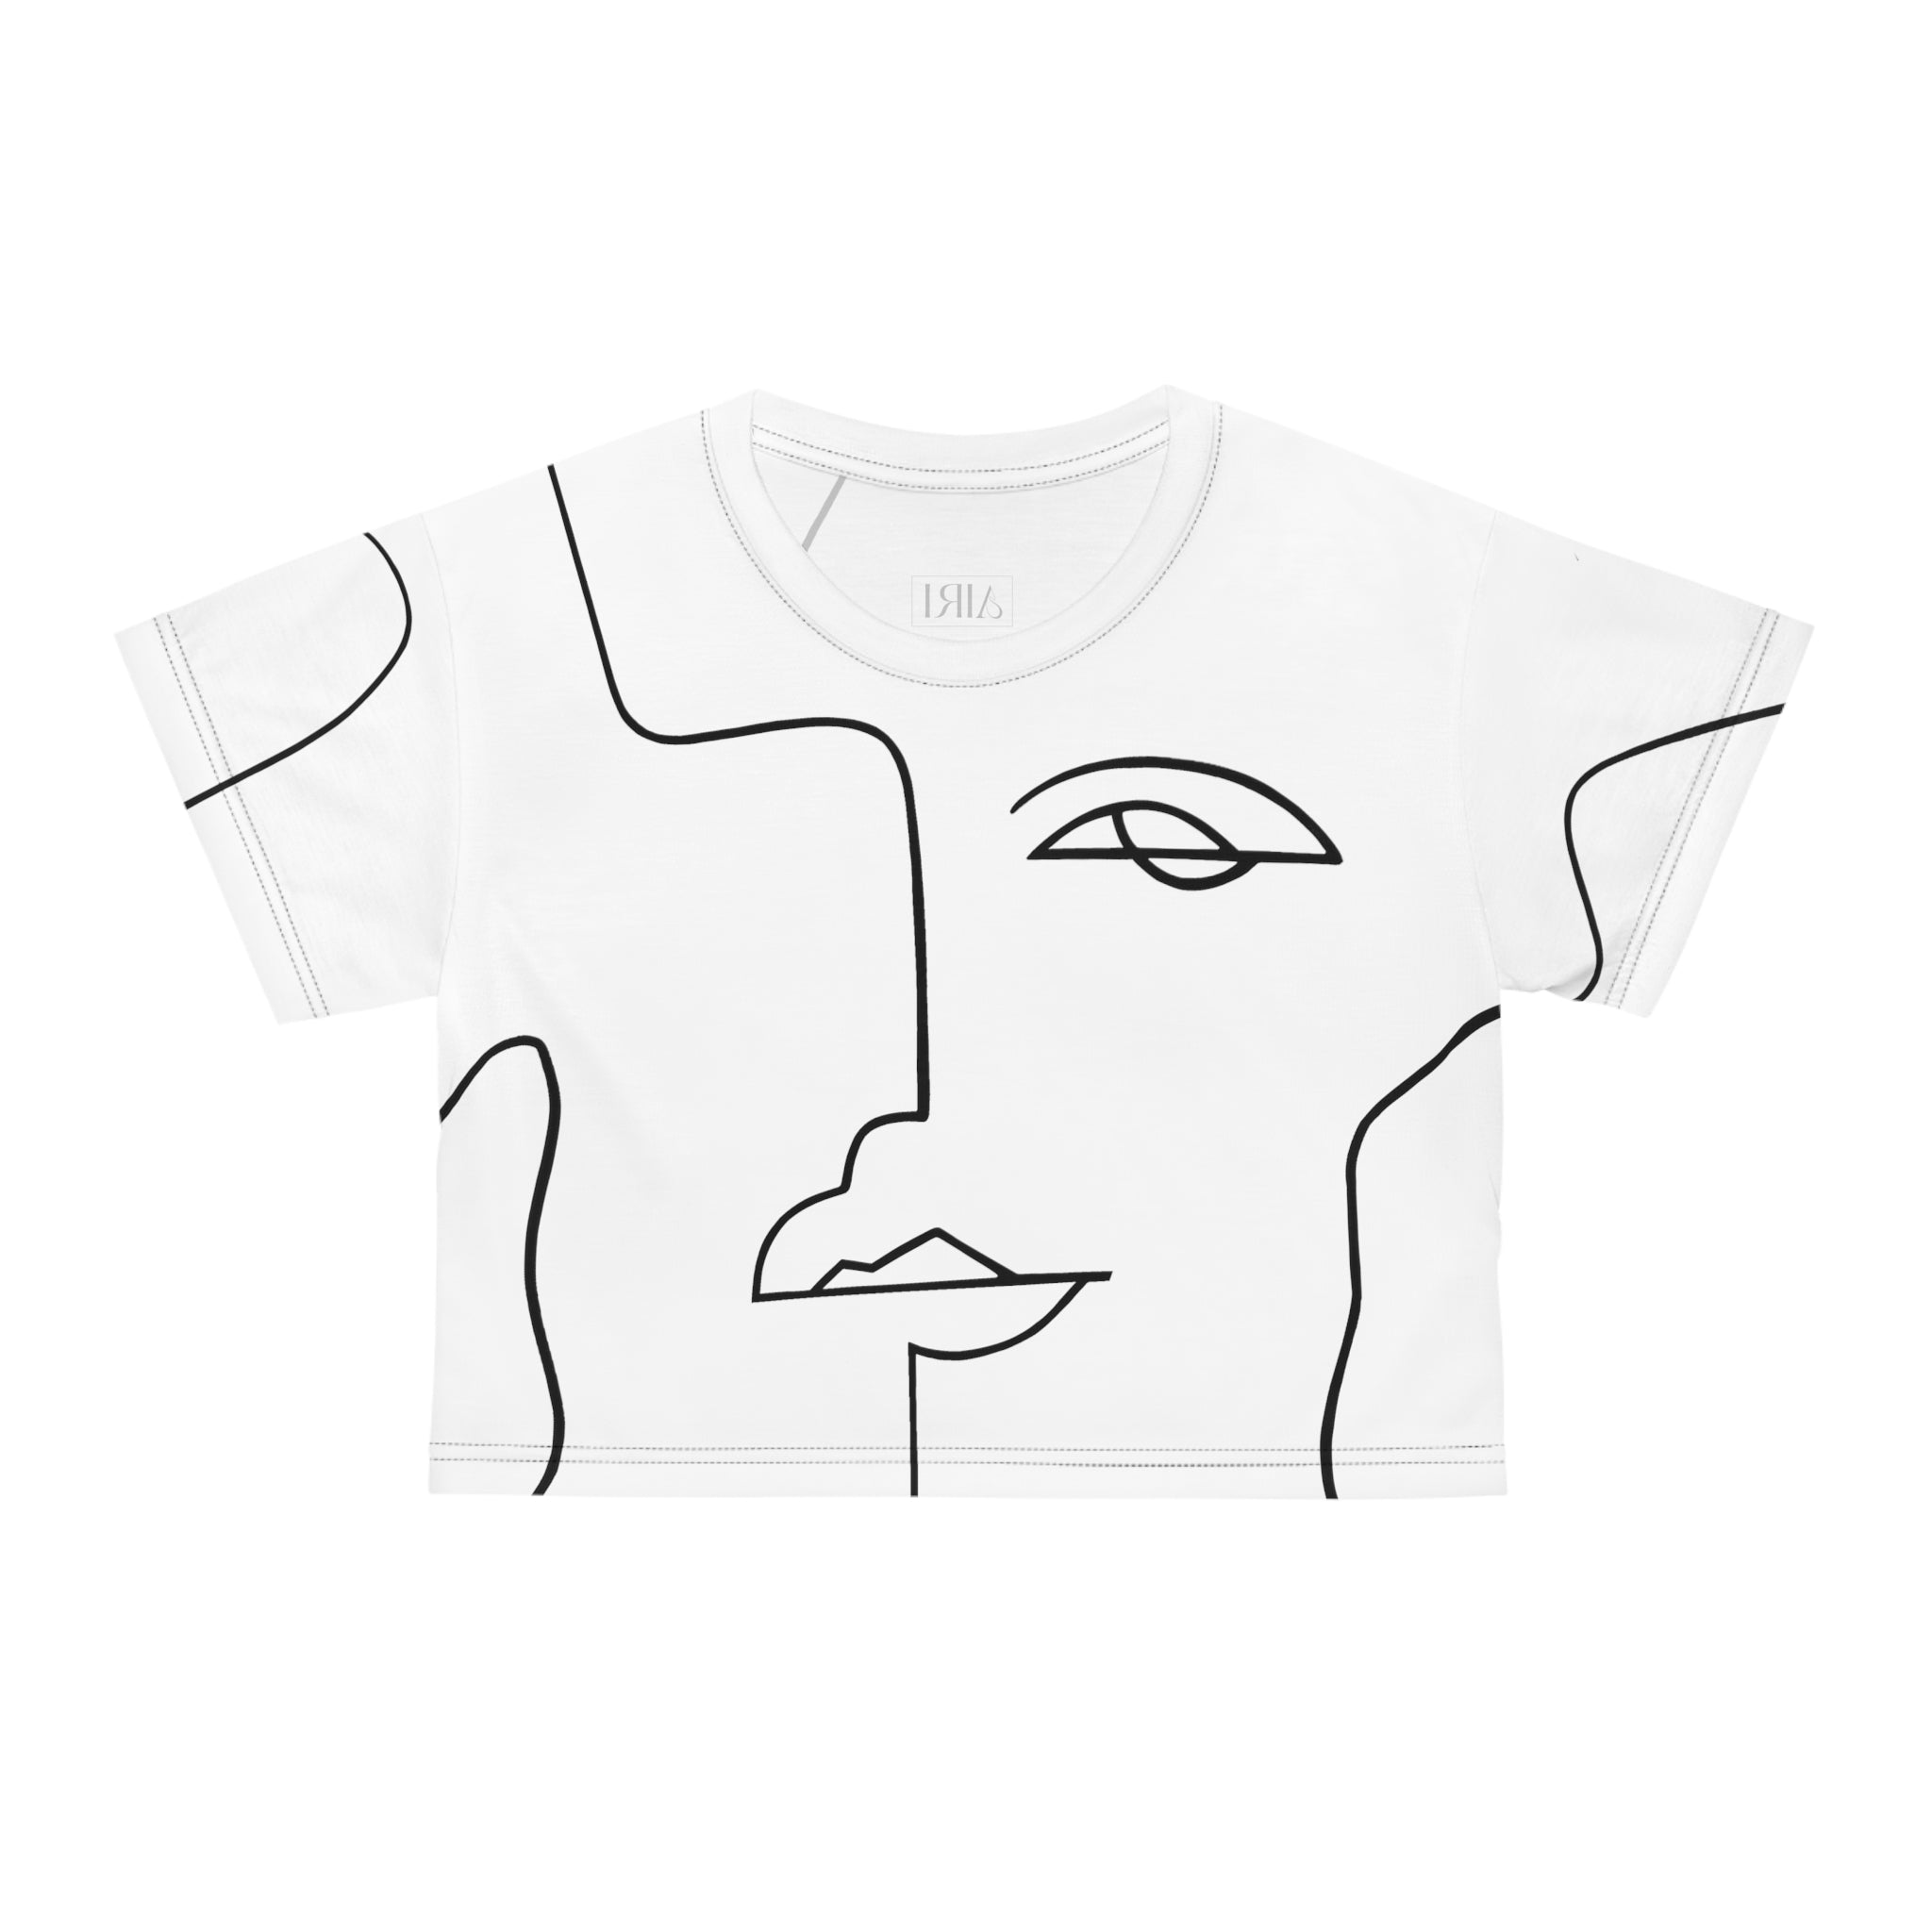 AIRI 1Line Crop Top | Abstract Figure Black and White One Line Art Design